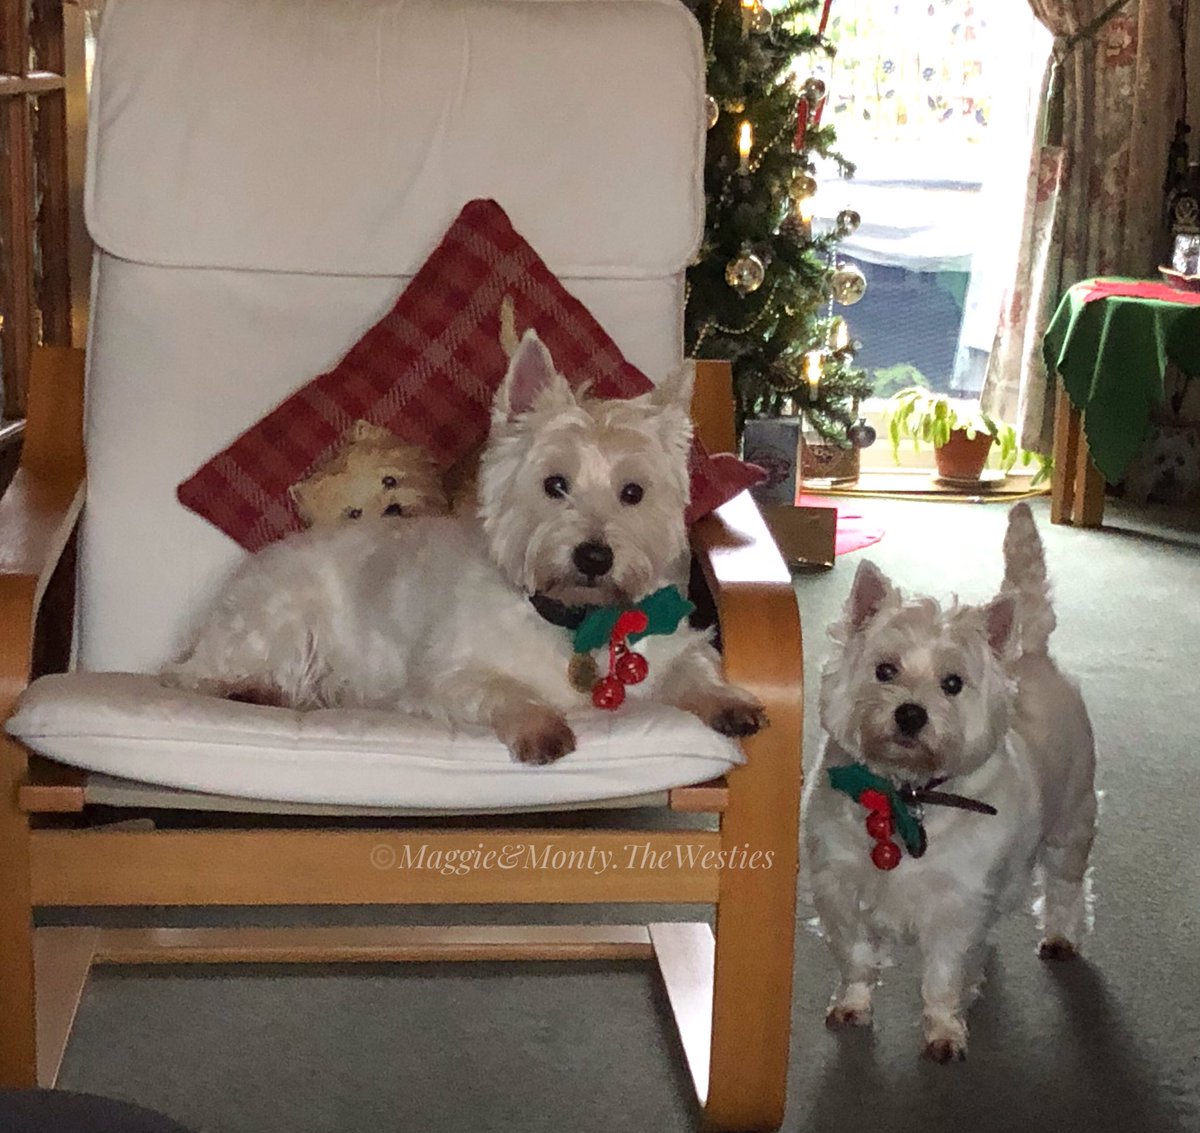 Hope everyone had a Wonderful Christmas!  We had a lovely day with Mum & Dad at Granny & Grandads! #maggiethewestie #montythewestie #maggieandmontythewesties #westie #westies #westhighlandterrier #westiesofinstagram #dogsoftwitter #westiesoftwitter #xmas2019